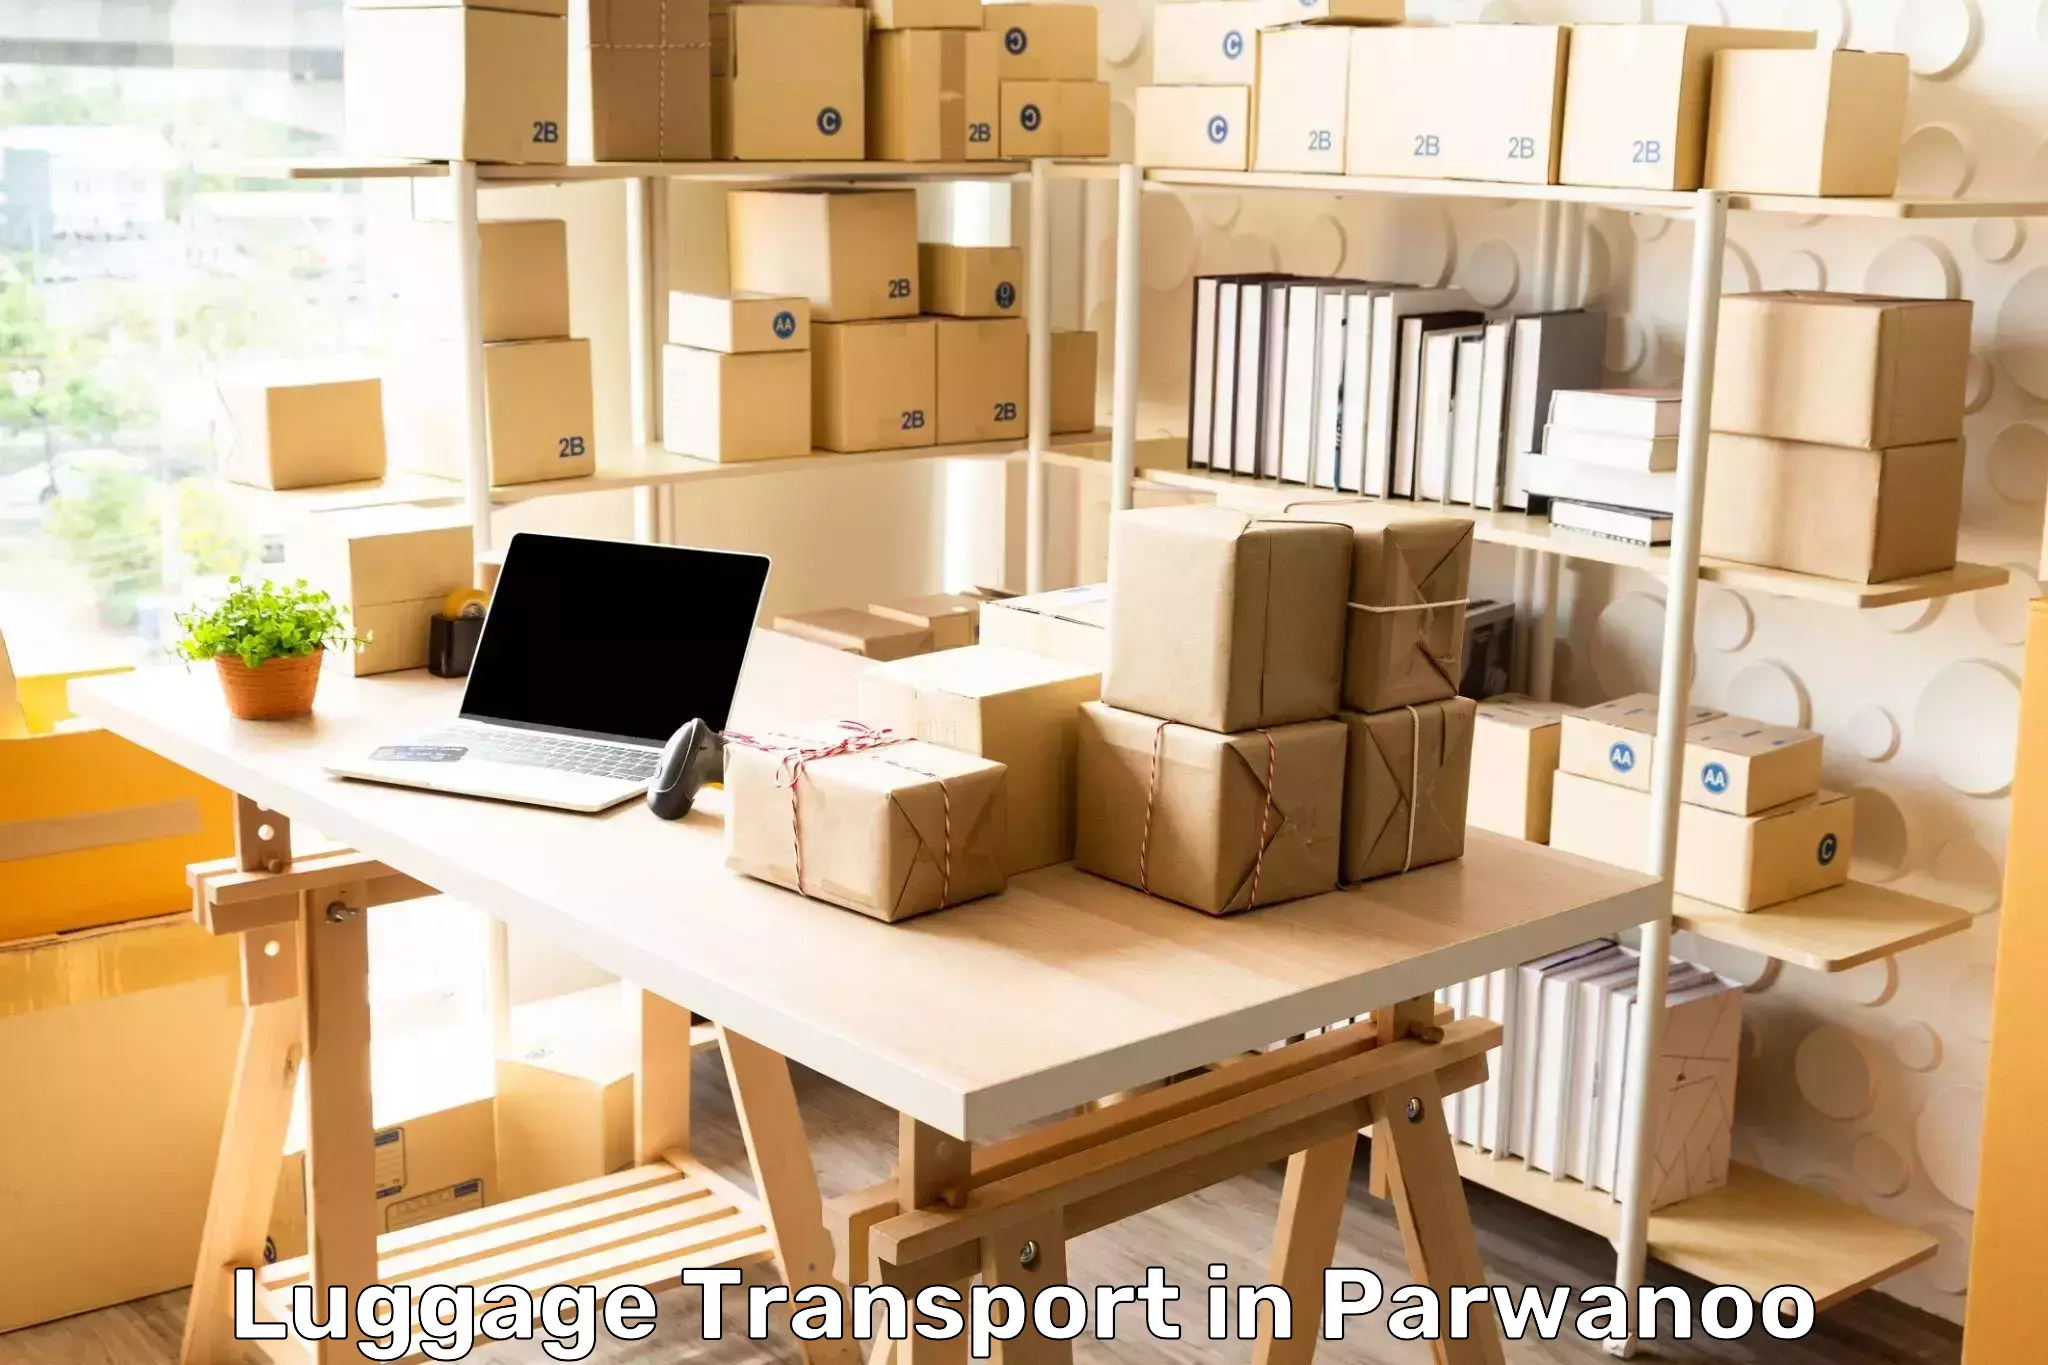 Luggage shipment specialists in Parwanoo